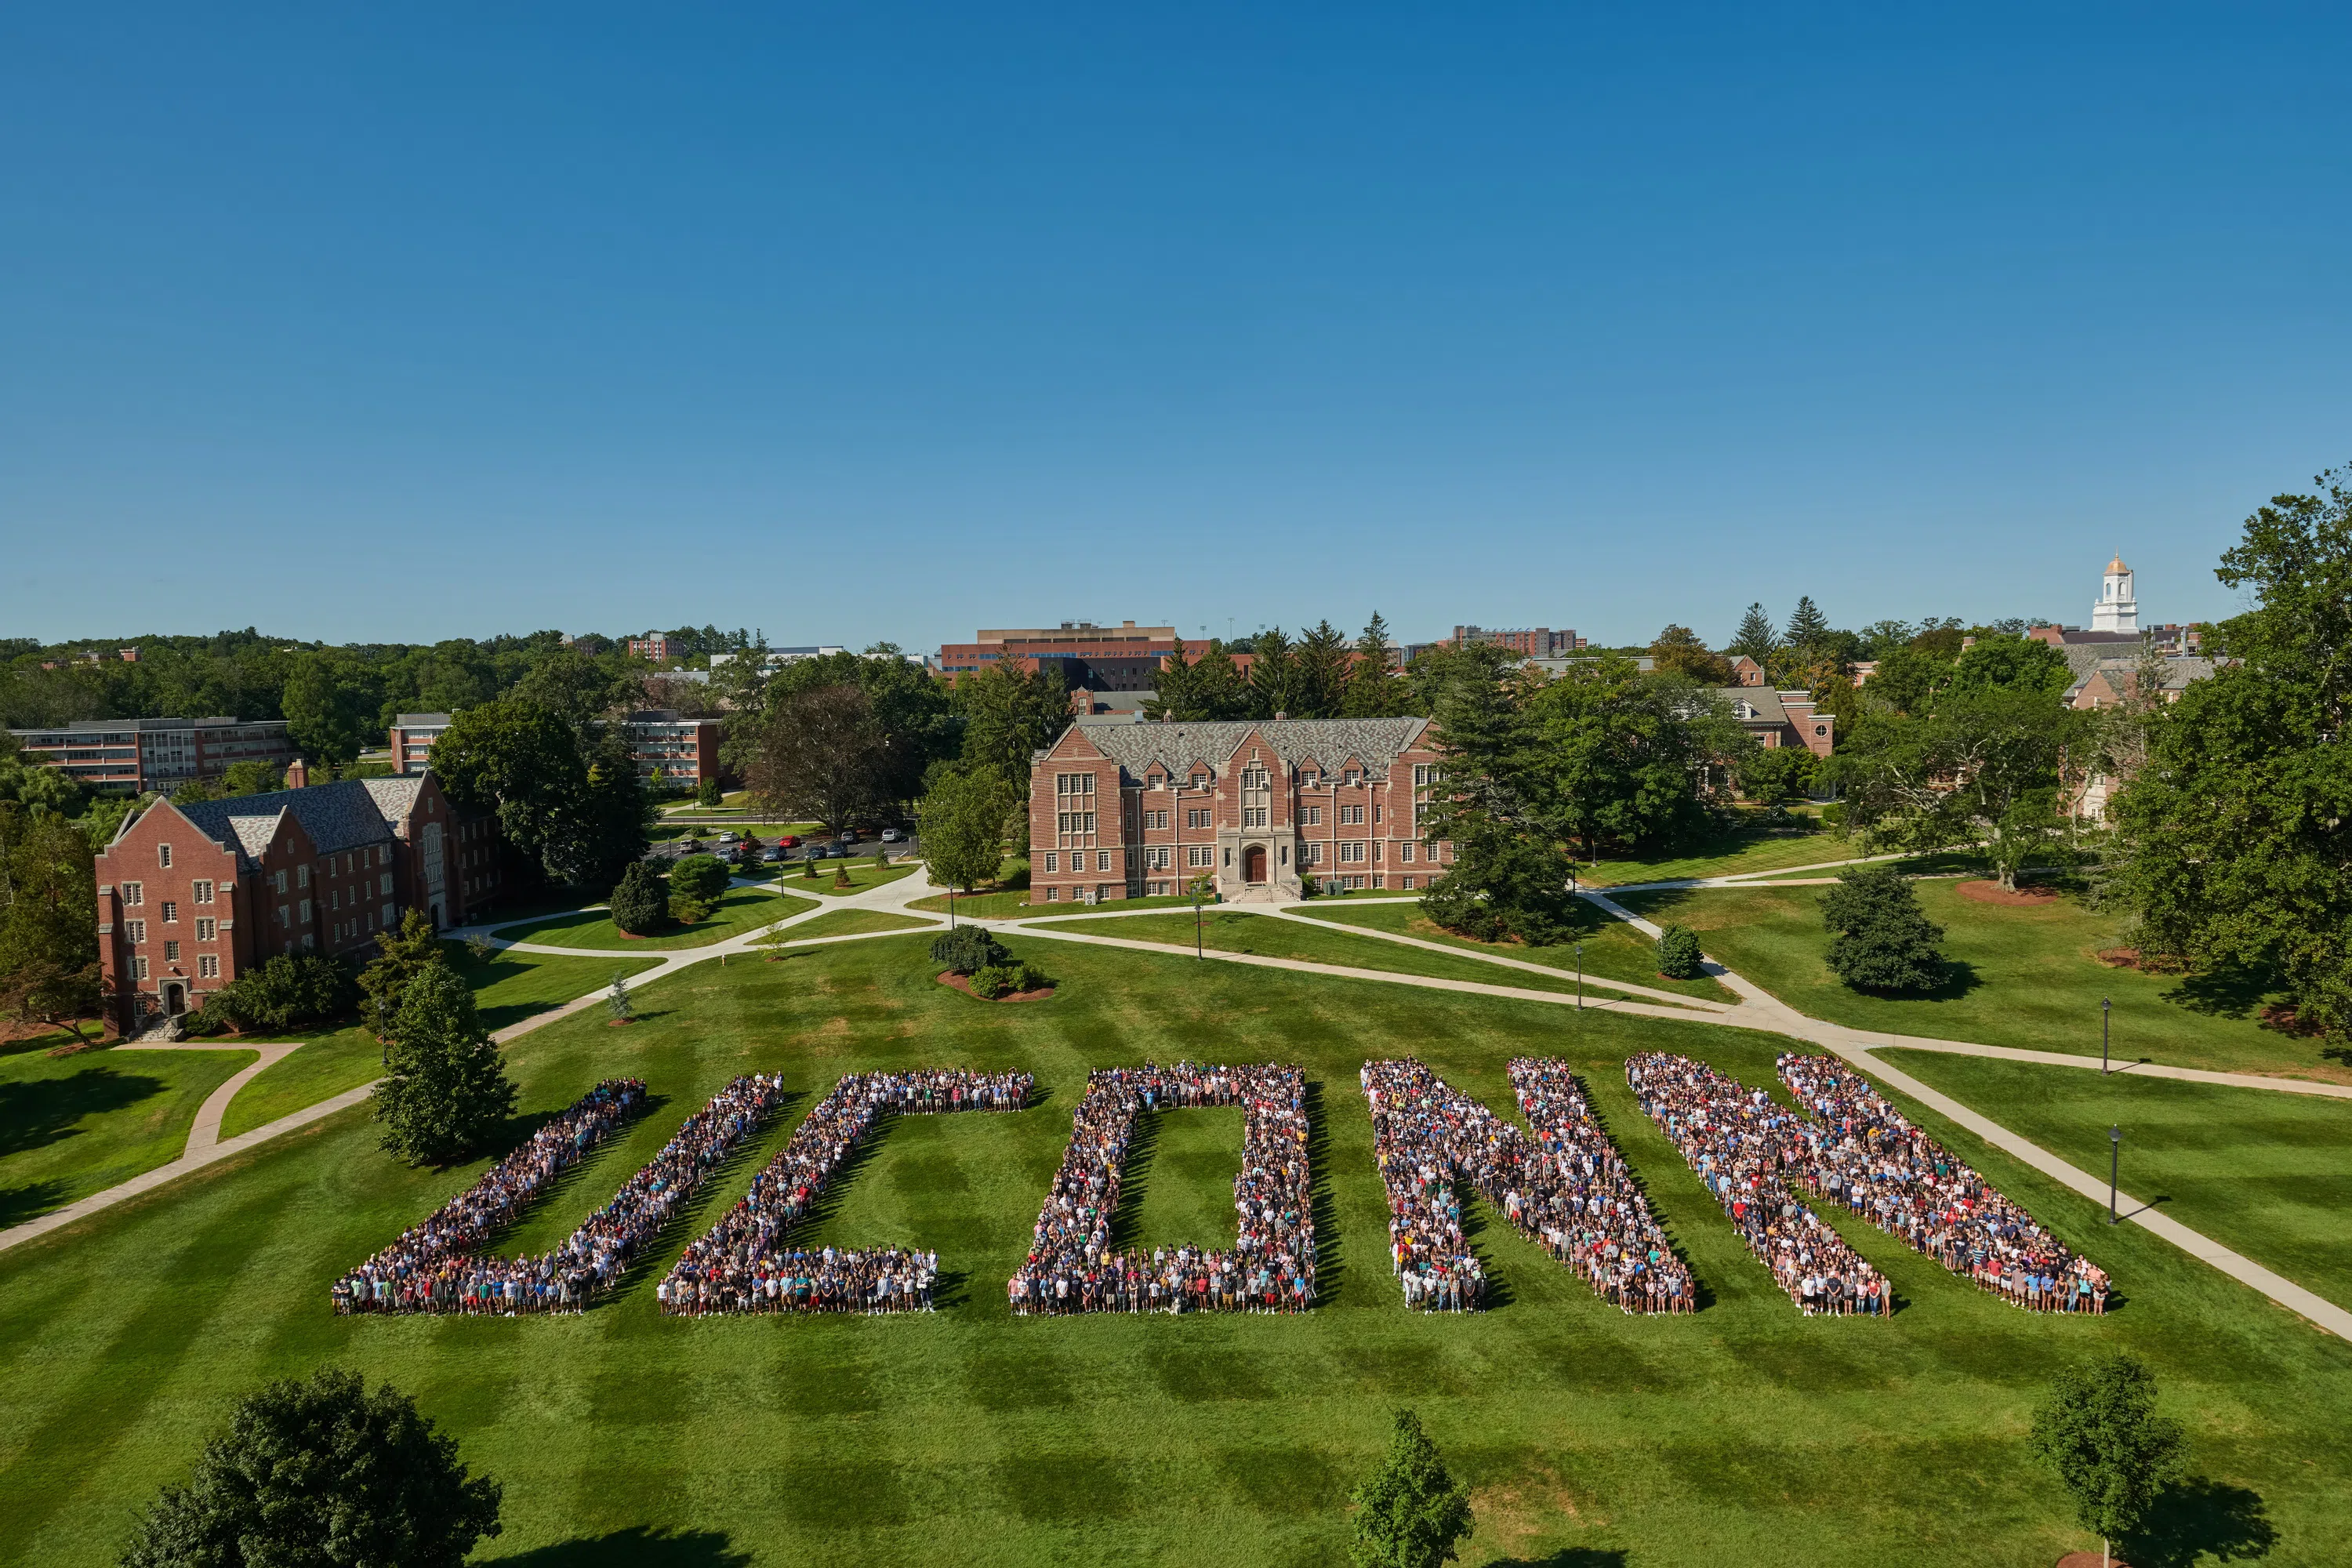 Students lining up to spell U-C-O-N-N for a class photo, one of the university's many traditions